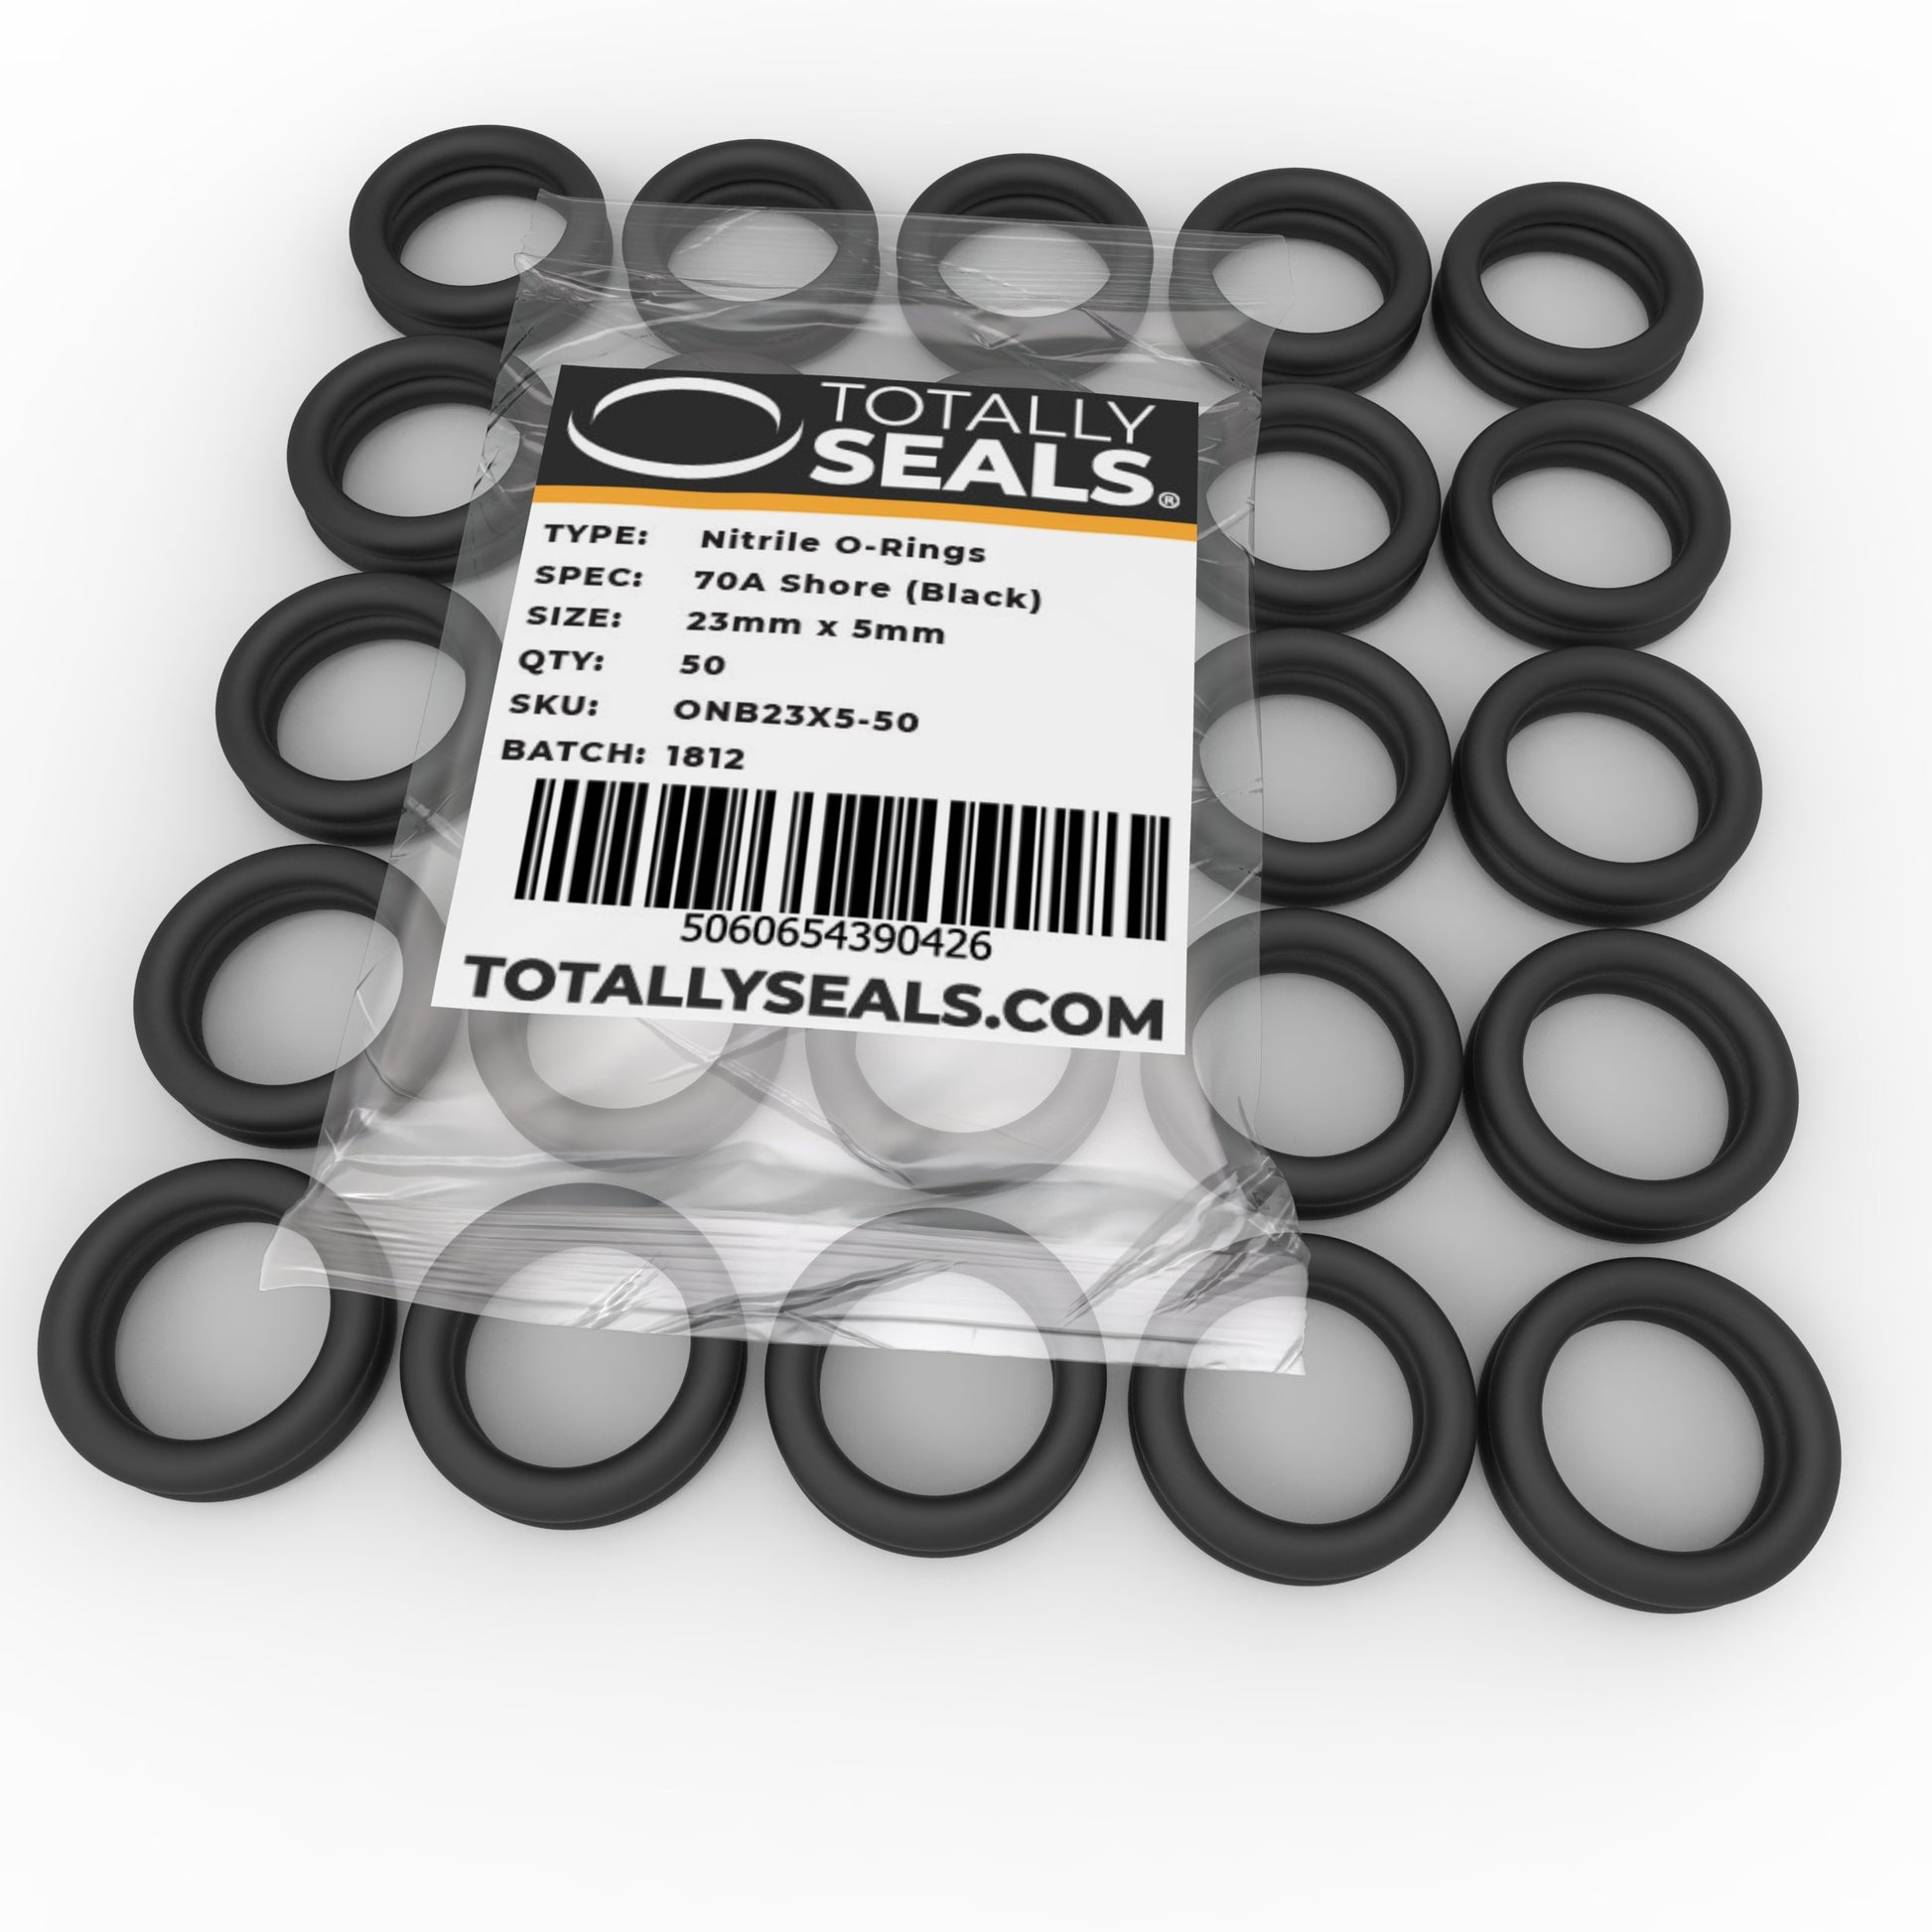 23mm x 5mm (33mm OD) Nitrile O-Rings - Totally Seals®